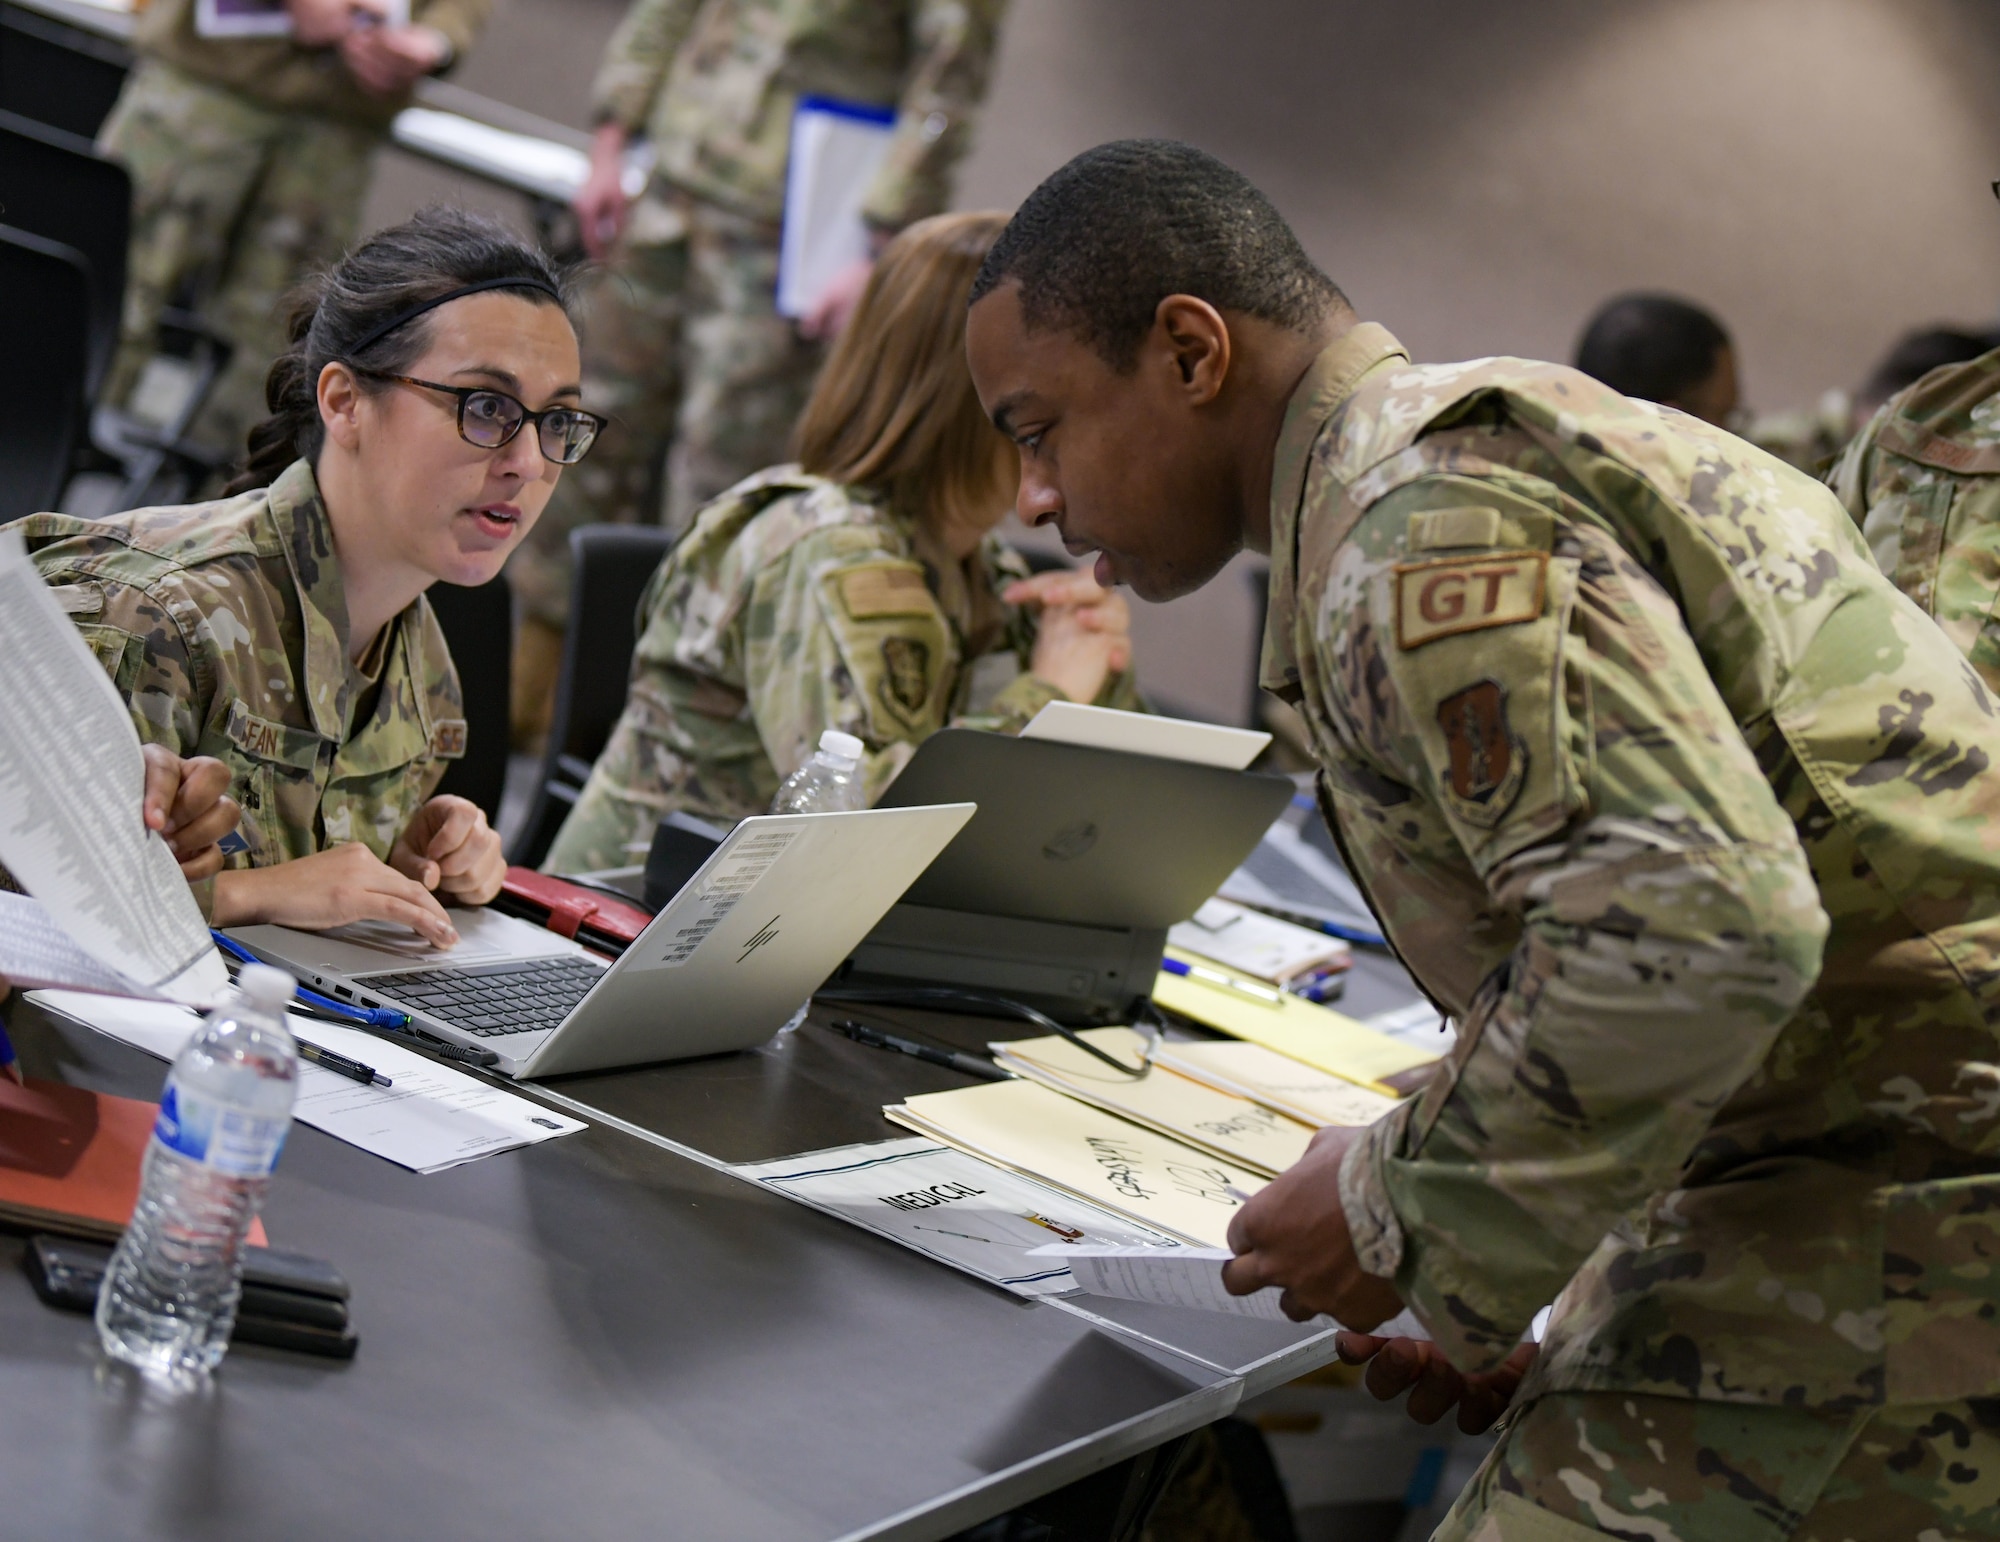 Airmen with the 172nd Airlift Wing, Jackson, Mississippi, are guided through an administrative check-in process during a three-day base-wide training event that strengthened the Wing's capability of rapid employment and security of assets and personnel in a contested environment. (U.S. Air National Guard photo by Staff. Sgt. Jared Bounds.)